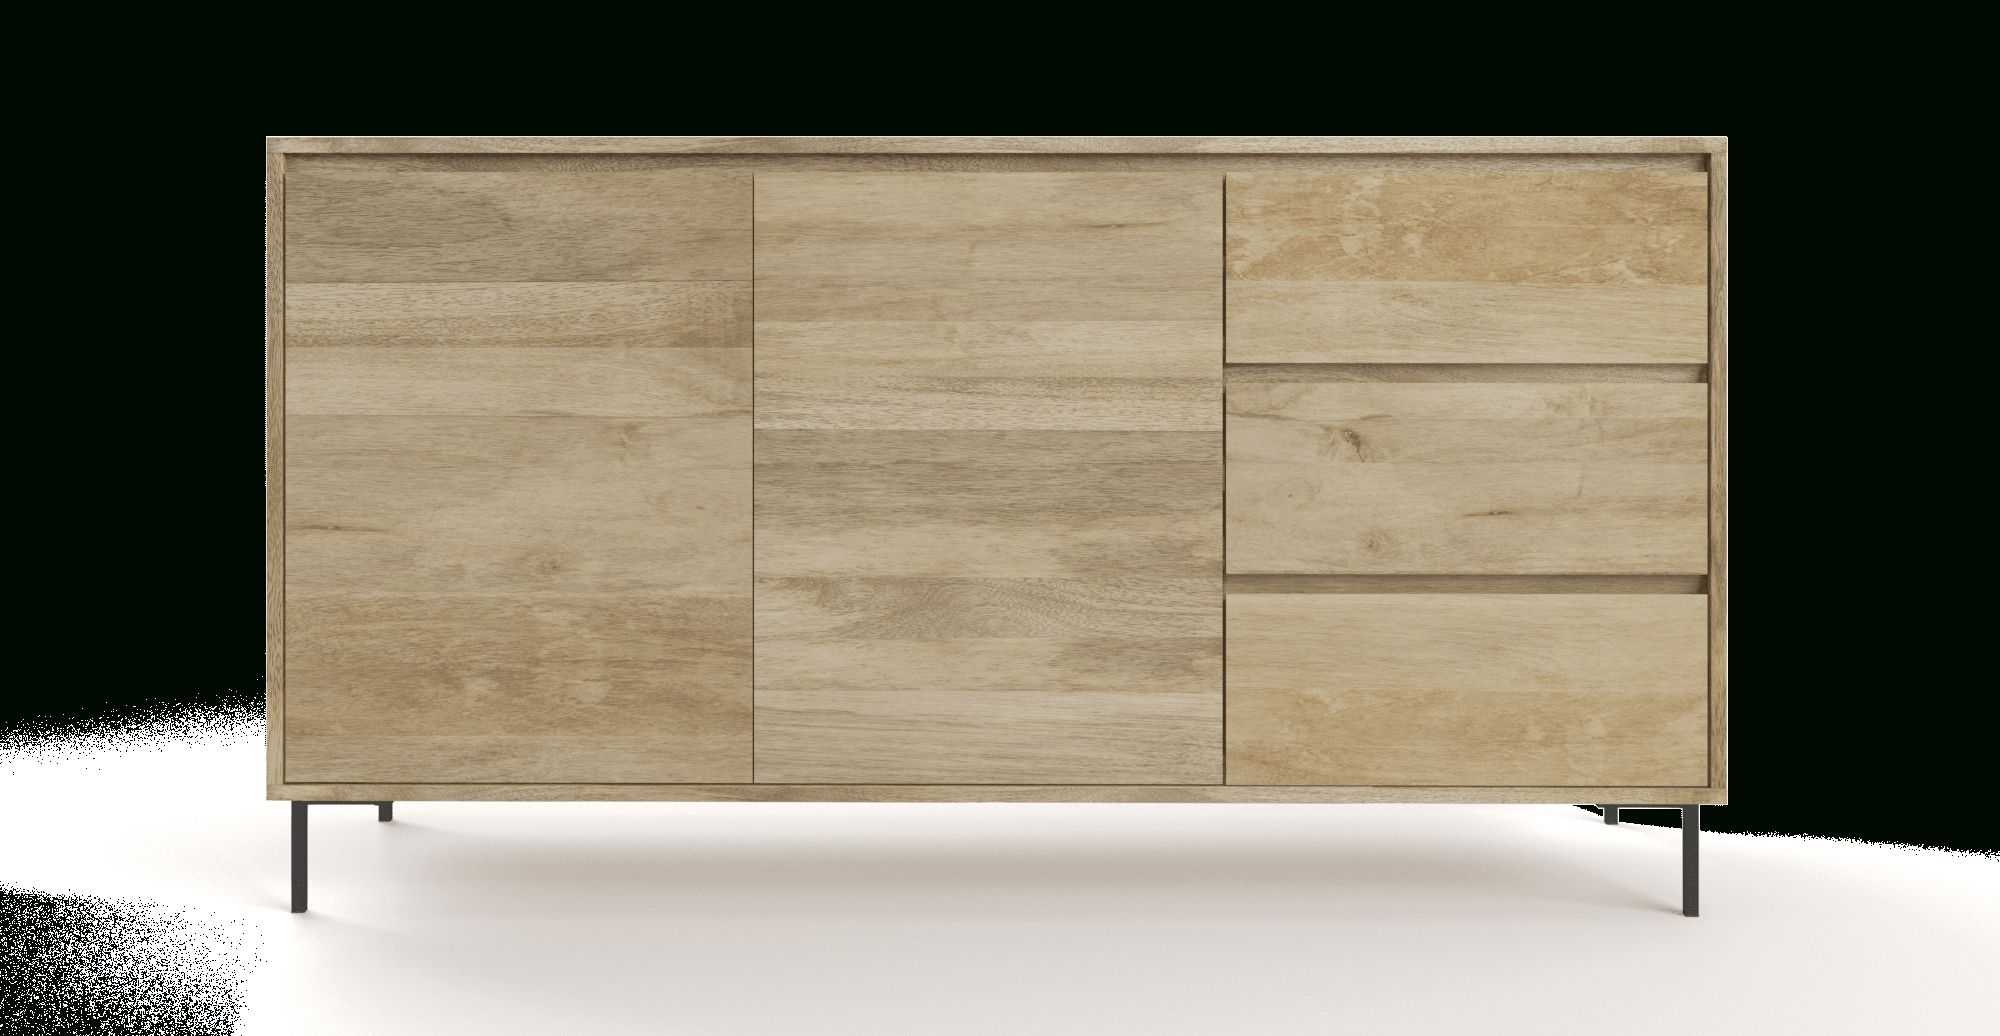 Buy Martin Large Sideboard Online In Australia | Brosa Pertaining To Most Popular Natural Mango Wood Finish Sideboards (View 15 of 20)